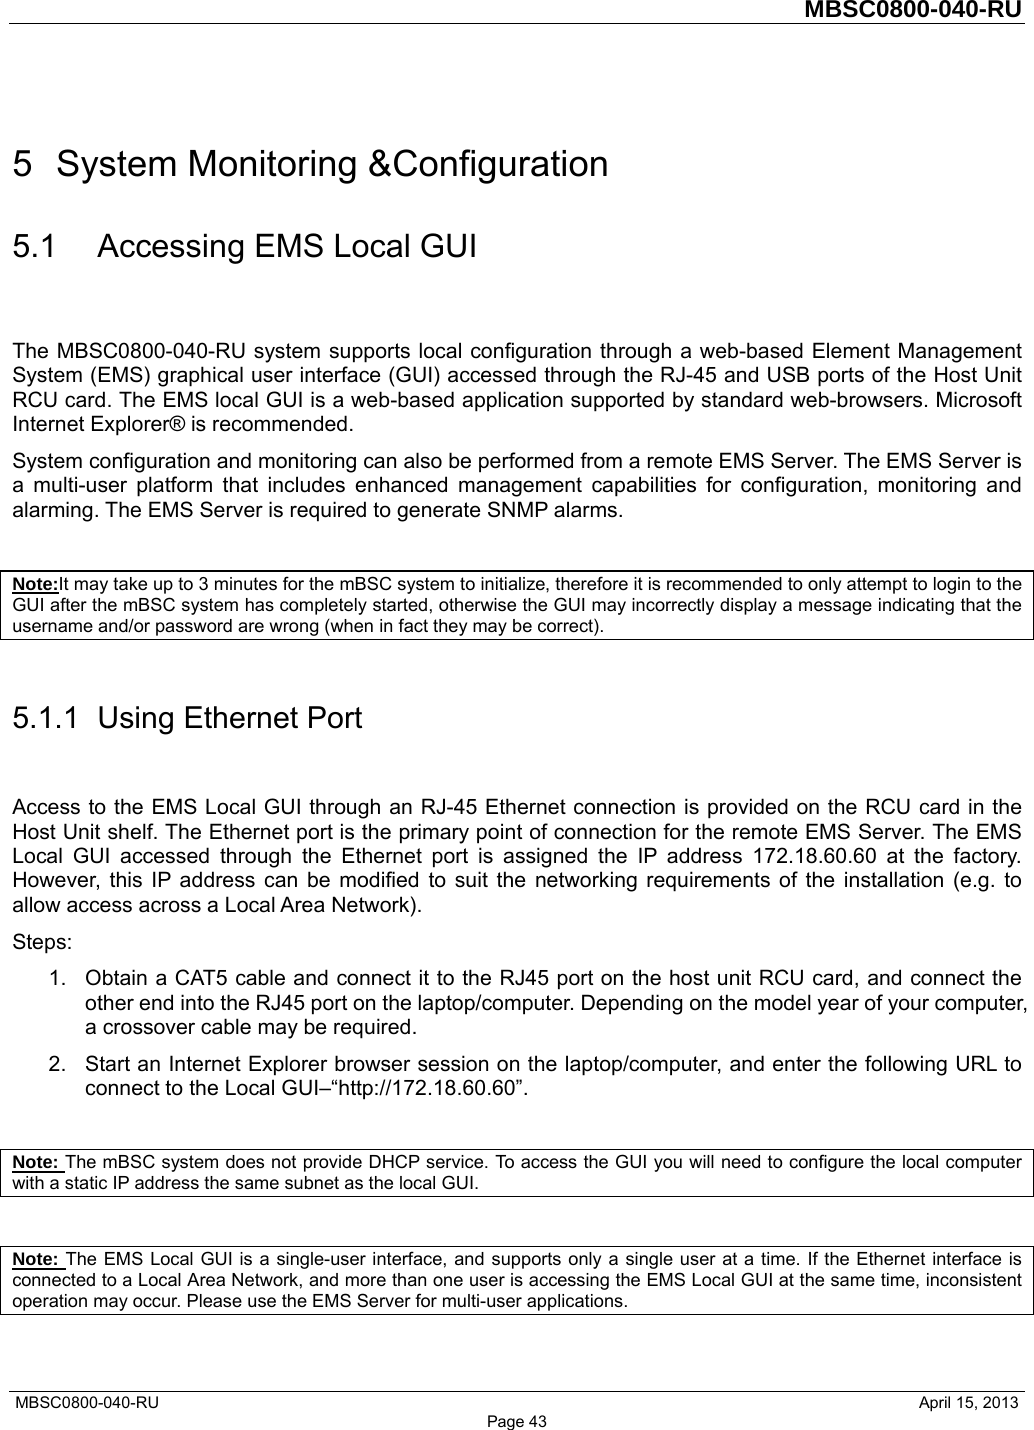         MBSC0800-040-RU   MBSC0800-040-RU                                                   April 15, 2013 Page 43 5  System Monitoring &amp;Configuration 5.1  Accessing EMS Local GUI The MBSC0800-040-RU system supports local configuration through a web-based Element Management System (EMS) graphical user interface (GUI) accessed through the RJ-45 and USB ports of the Host Unit RCU card. The EMS local GUI is a web-based application supported by standard web-browsers. Microsoft Internet Explorer® is recommended. System configuration and monitoring can also be performed from a remote EMS Server. The EMS Server is a multi-user platform that includes enhanced management capabilities for configuration, monitoring and alarming. The EMS Server is required to generate SNMP alarms.  Note:It may take up to 3 minutes for the mBSC system to initialize, therefore it is recommended to only attempt to login to the GUI after the mBSC system has completely started, otherwise the GUI may incorrectly display a message indicating that the username and/or password are wrong (when in fact they may be correct).  5.1.1  Using Ethernet Port Access to the EMS Local GUI through an RJ-45 Ethernet connection is provided on the RCU card in the Host Unit shelf. The Ethernet port is the primary point of connection for the remote EMS Server. The EMS Local GUI accessed through the Ethernet port is assigned the IP address 172.18.60.60 at the factory. However, this IP address can be modified to suit the networking requirements of the installation (e.g. to allow access across a Local Area Network). Steps: 1.  Obtain a CAT5 cable and connect it to the RJ45 port on the host unit RCU card, and connect the other end into the RJ45 port on the laptop/computer. Depending on the model year of your computer, a crossover cable may be required.   2.  Start an Internet Explorer browser session on the laptop/computer, and enter the following URL to connect to the Local GUI–“http://172.18.60.60”.    Note: The mBSC system does not provide DHCP service. To access the GUI you will need to configure the local computer with a static IP address the same subnet as the local GUI.  Note: The EMS Local GUI is a single-user interface, and supports only a single user at a time. If the Ethernet interface is connected to a Local Area Network, and more than one user is accessing the EMS Local GUI at the same time, inconsistent operation may occur. Please use the EMS Server for multi-user applications. 